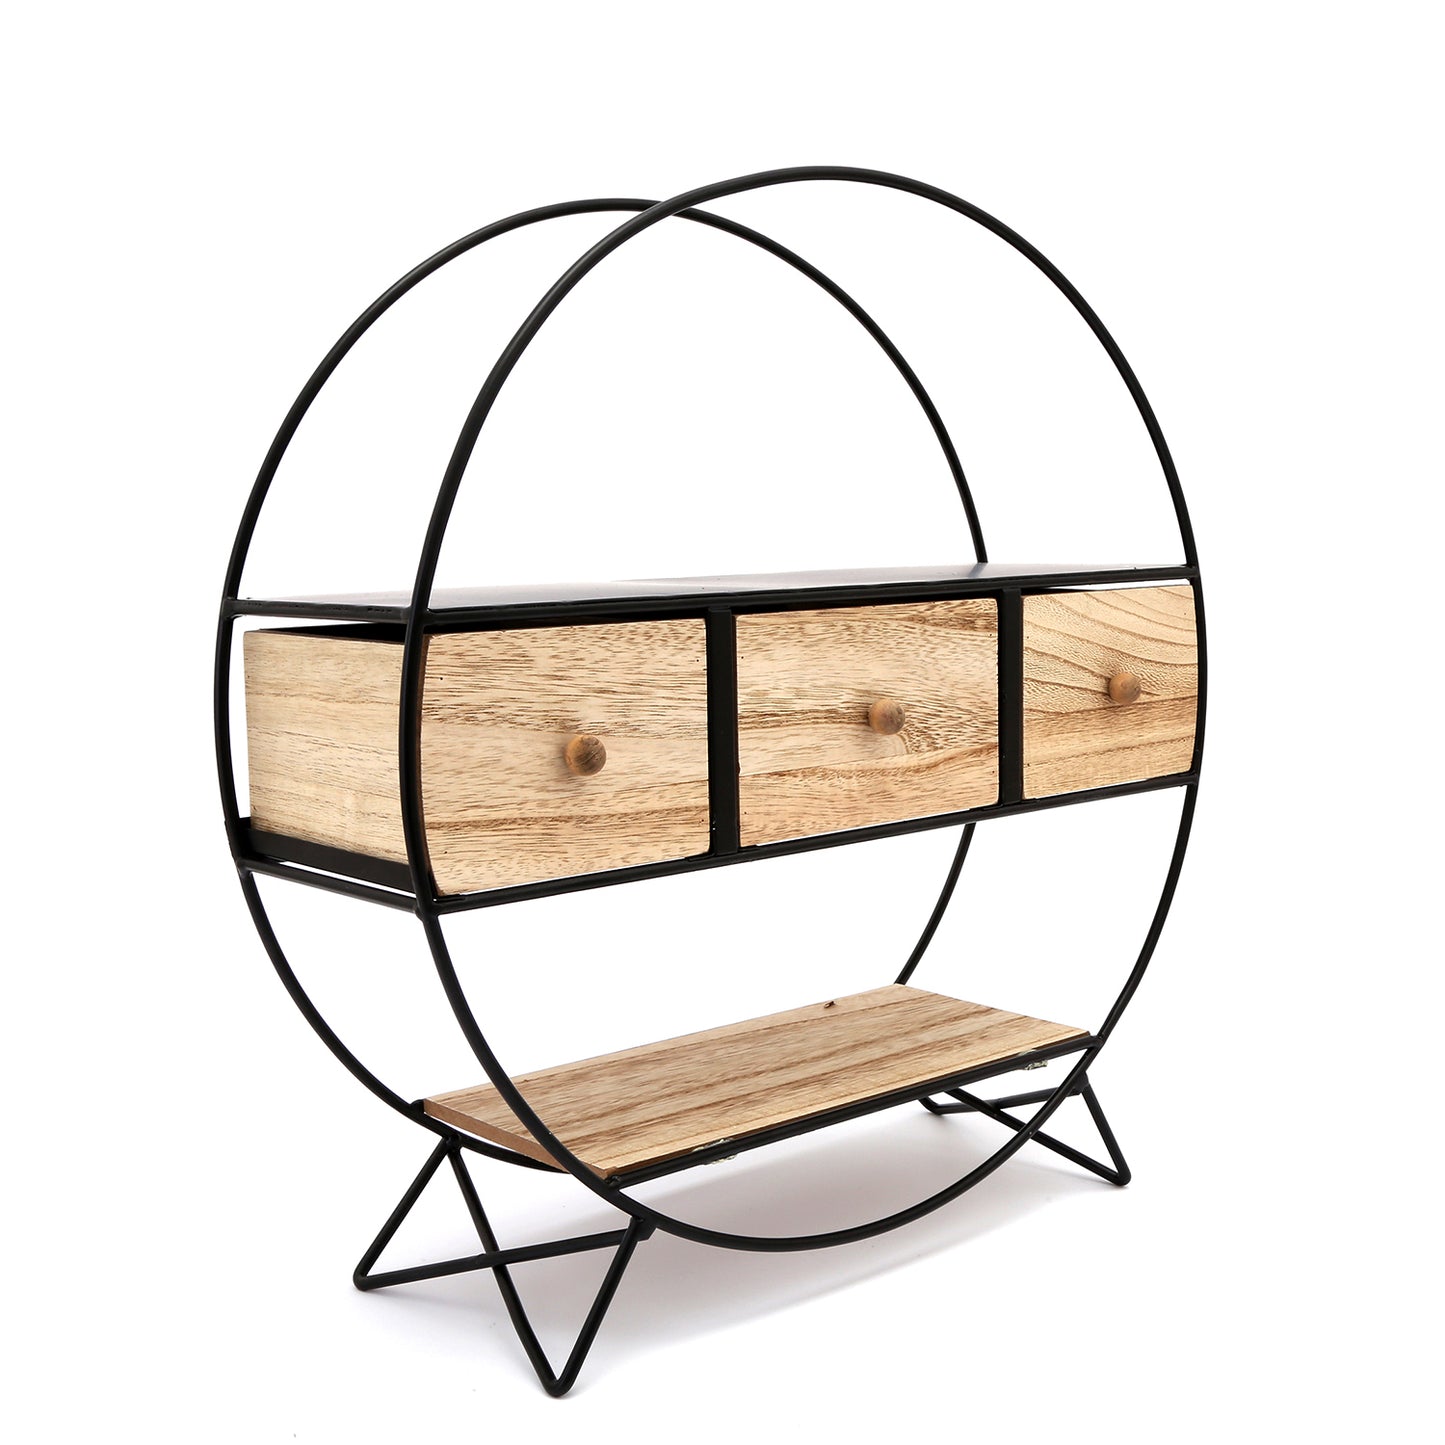 Round Free Standing Desk Display Shelf With Wooden Drawers